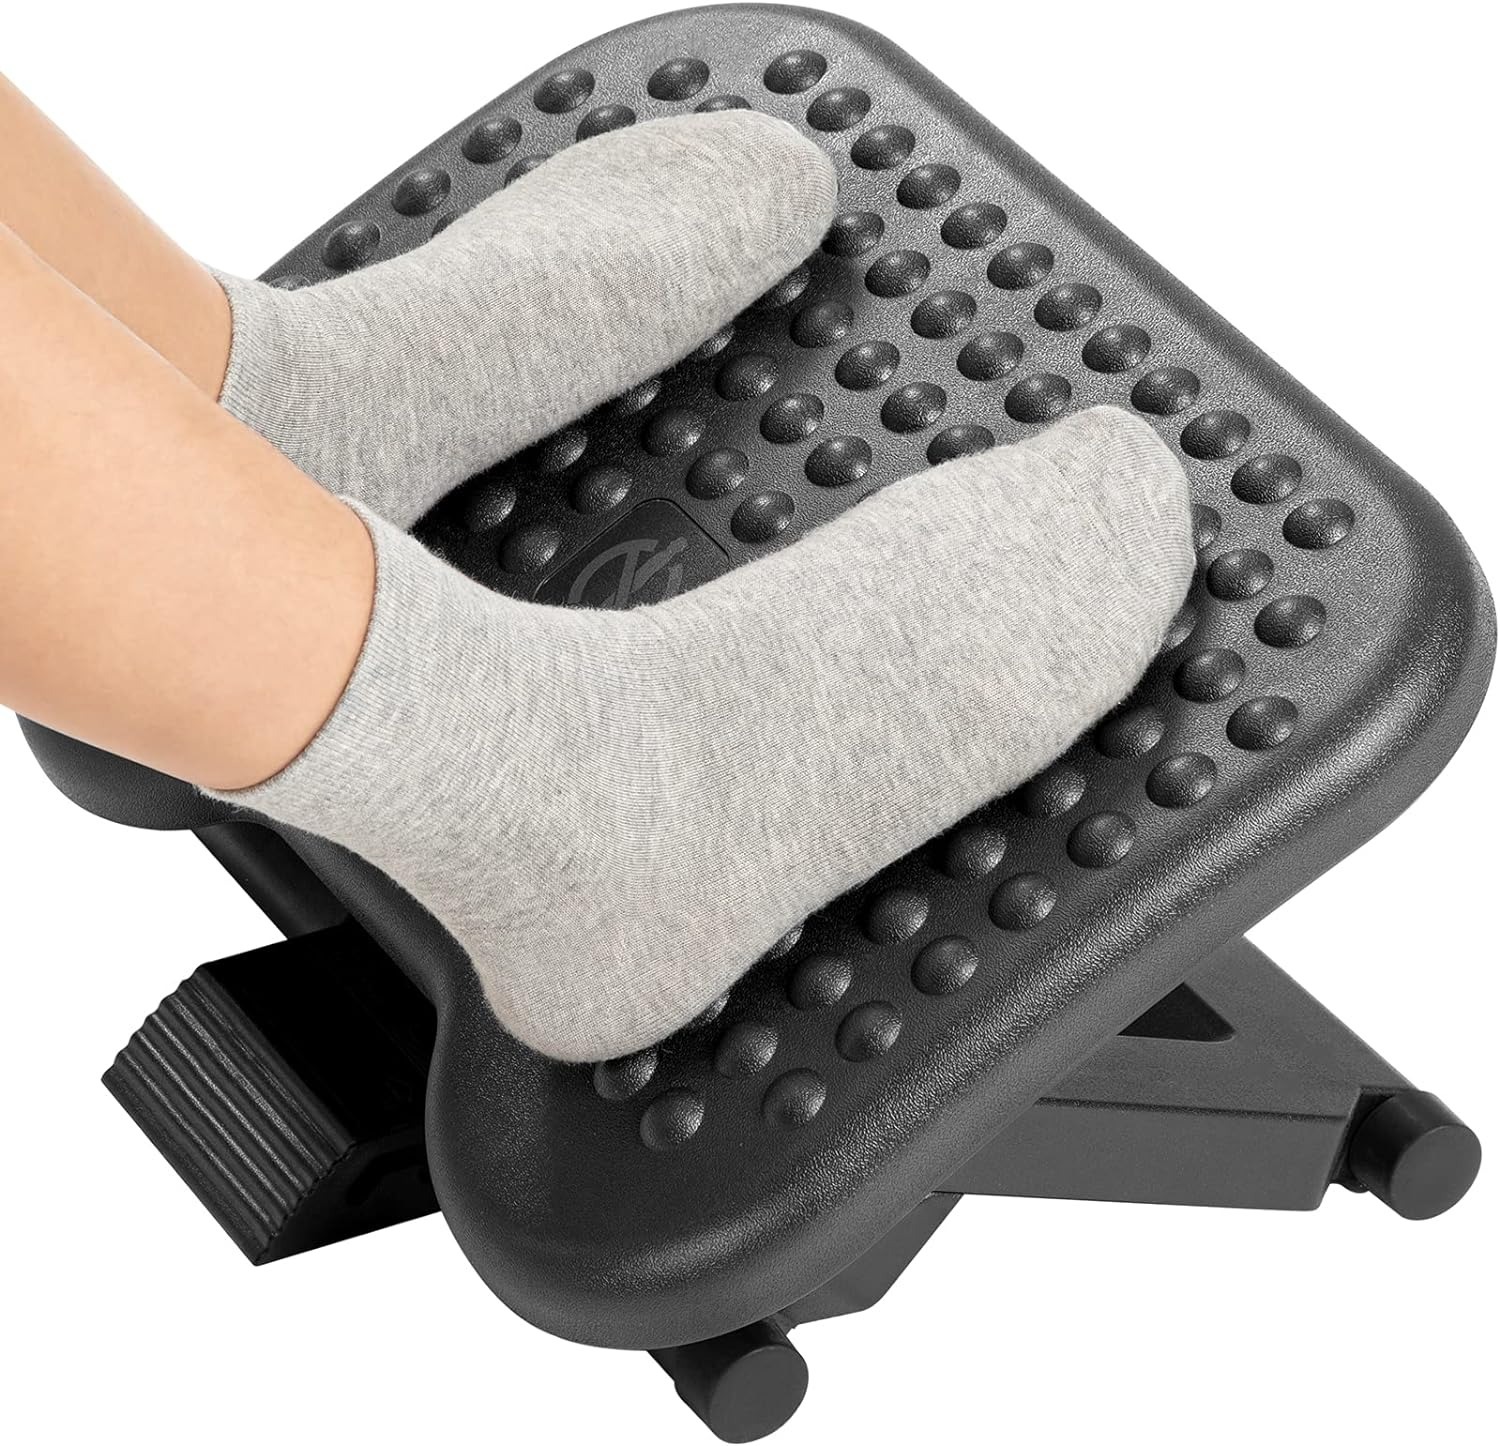 Prime Members: Huanuo Adjustable Under Desk Foot Rest $13.49 + Free Shipping